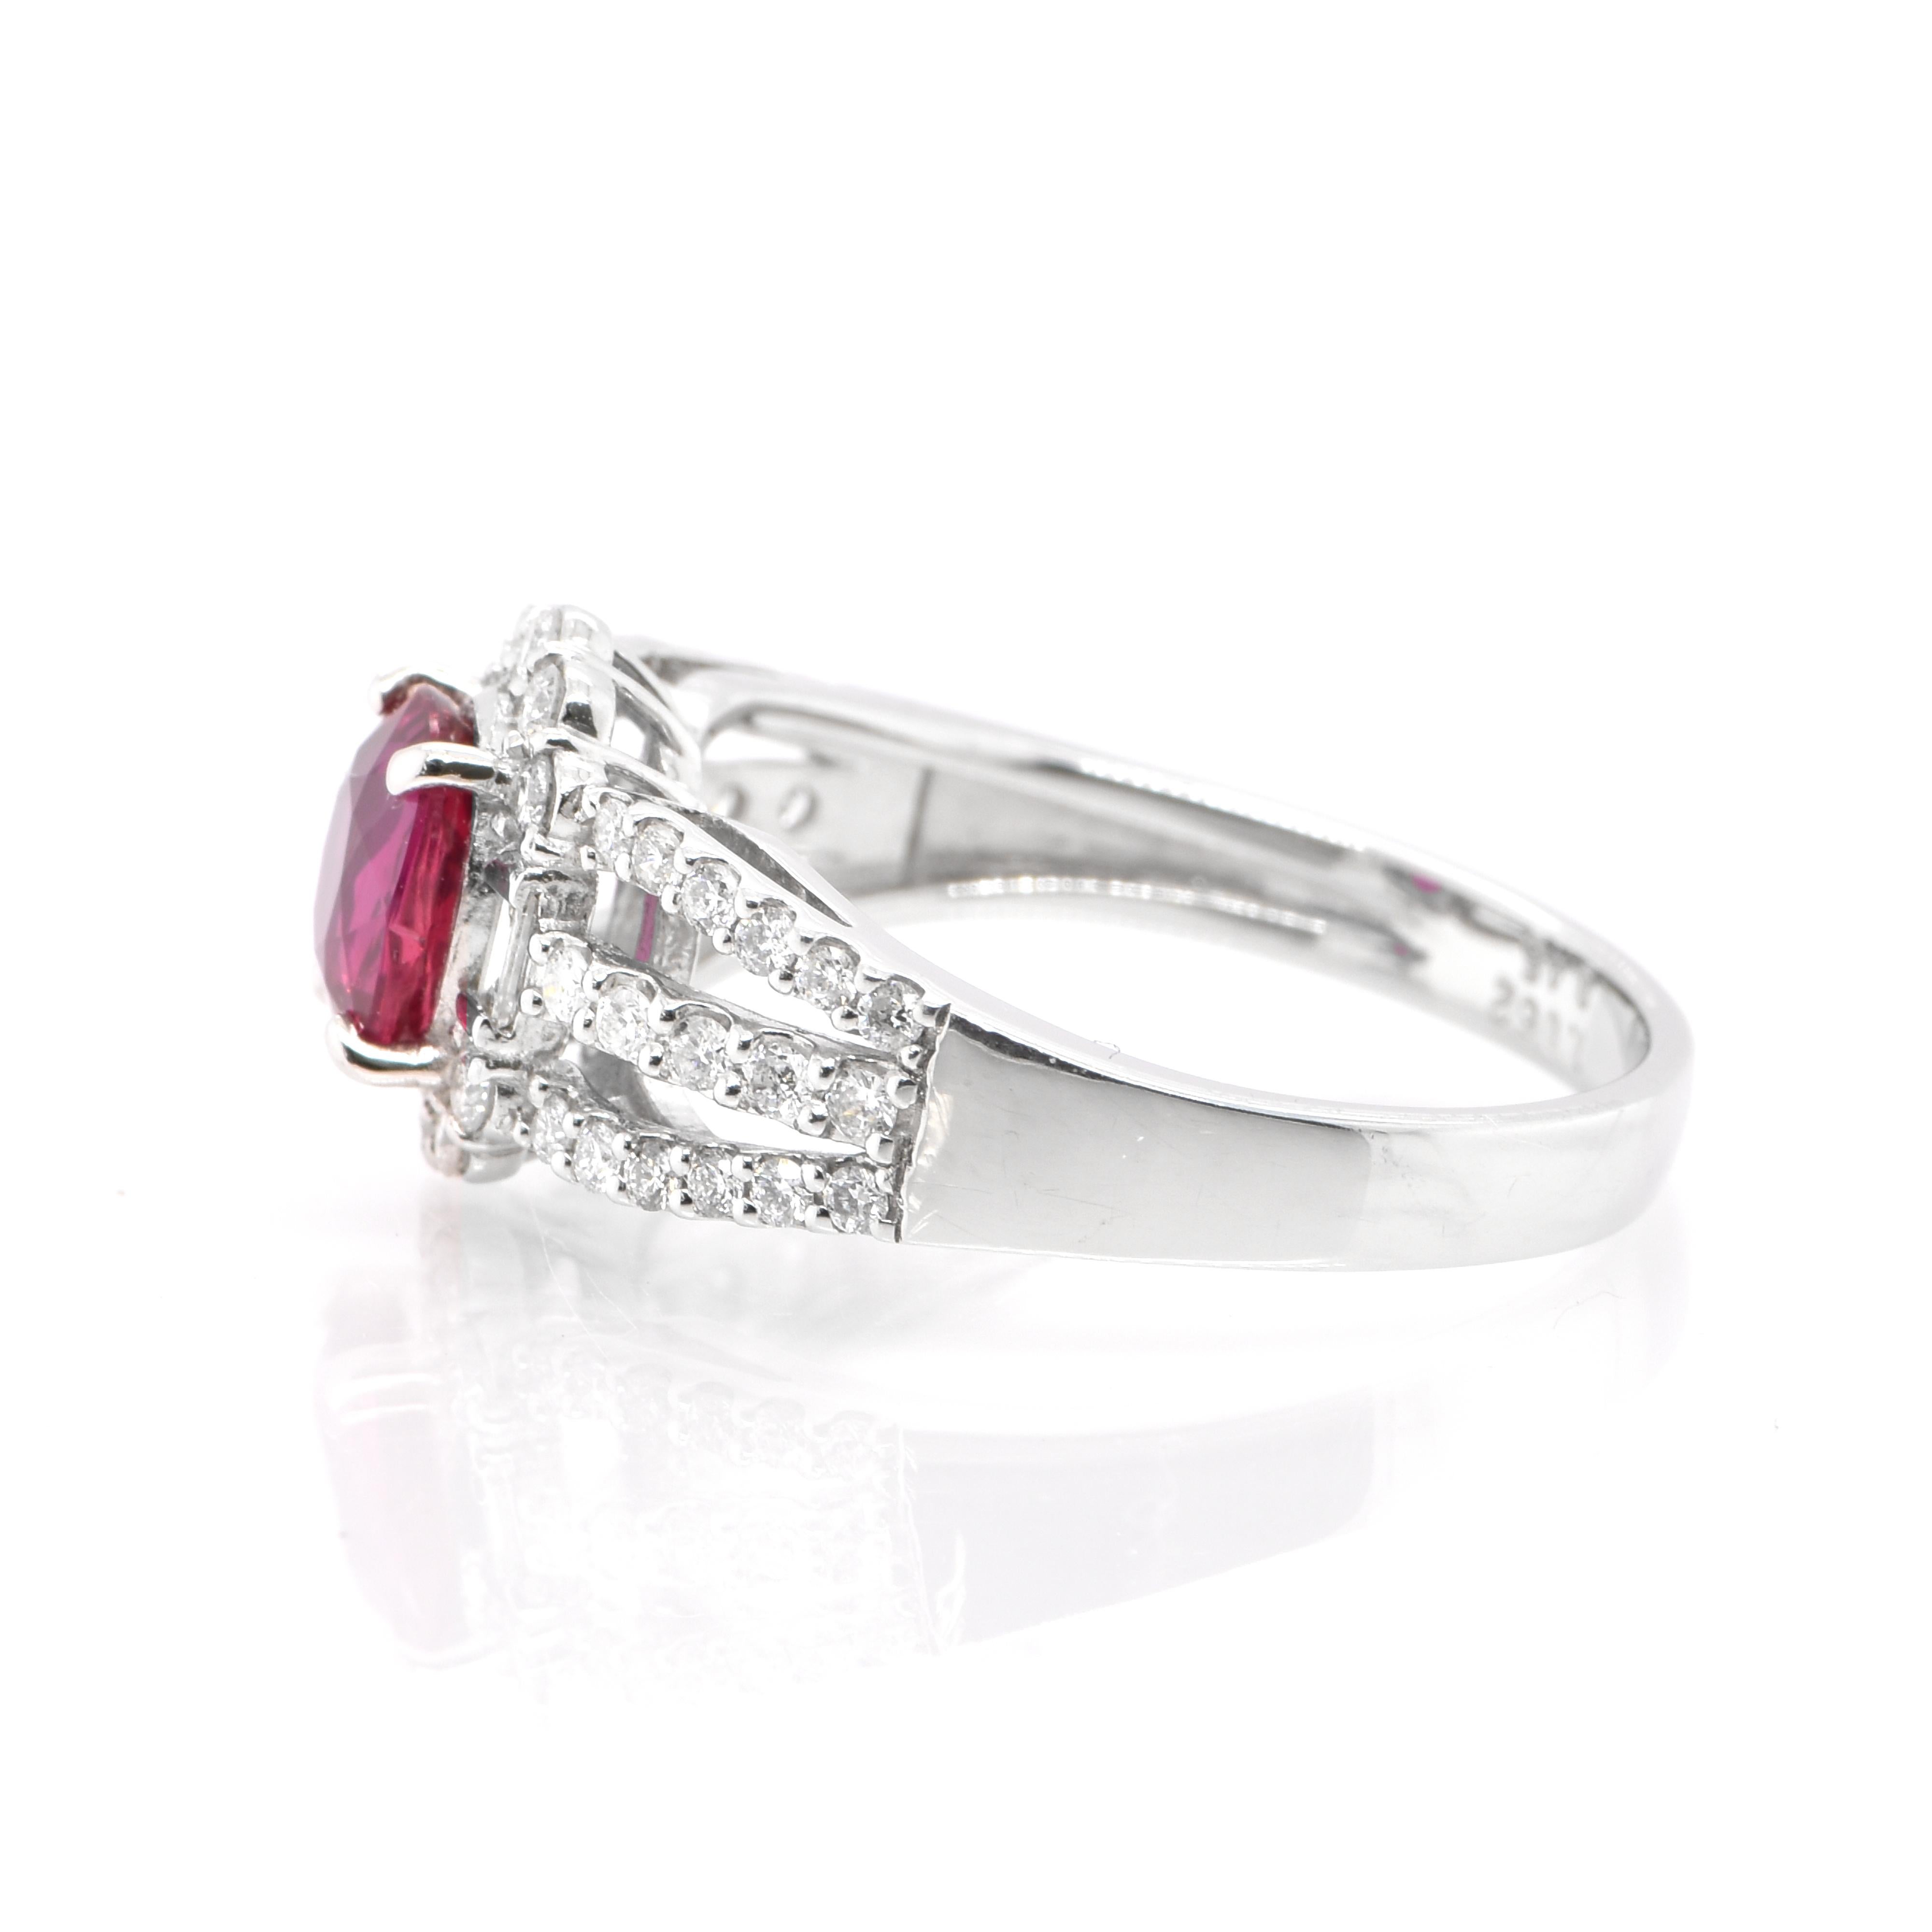 Modern 1.06 Carat Natural Vivid Red Ruby and Diamond Ring Set in Platinum For Sale